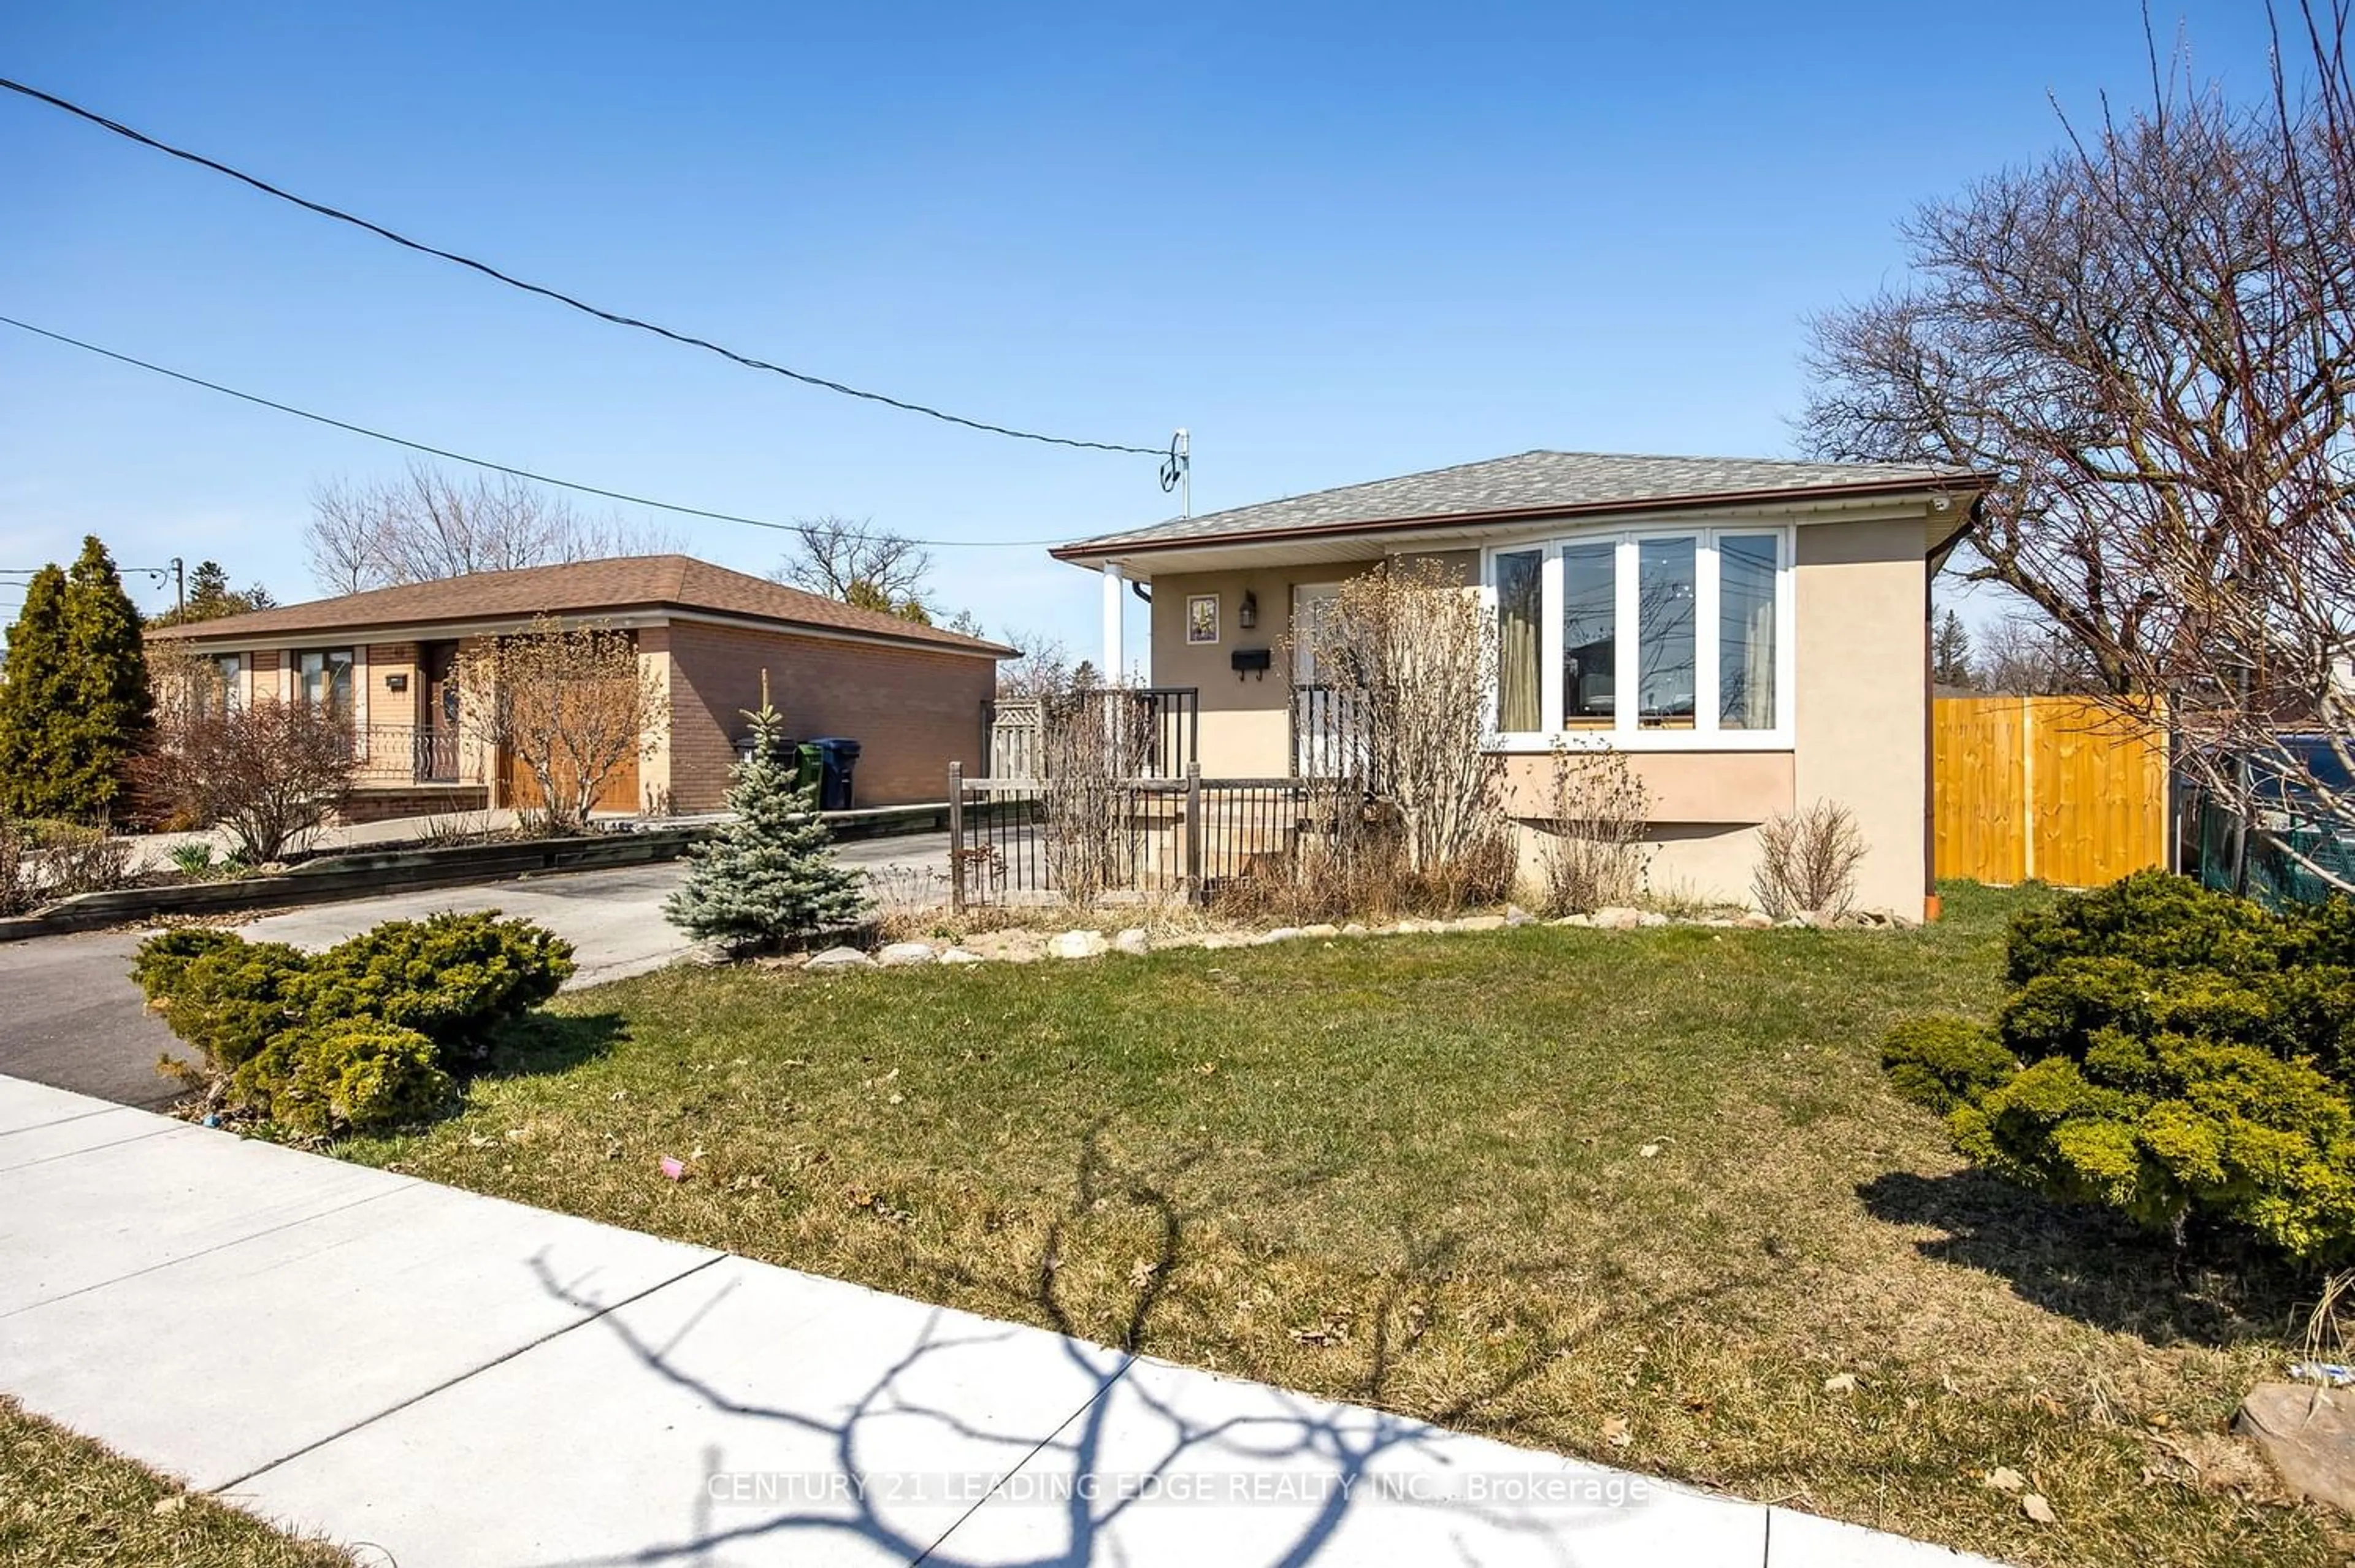 Frontside or backside of a home for 38 Wheatsheaf Cres, Toronto Ontario M3N 1P6